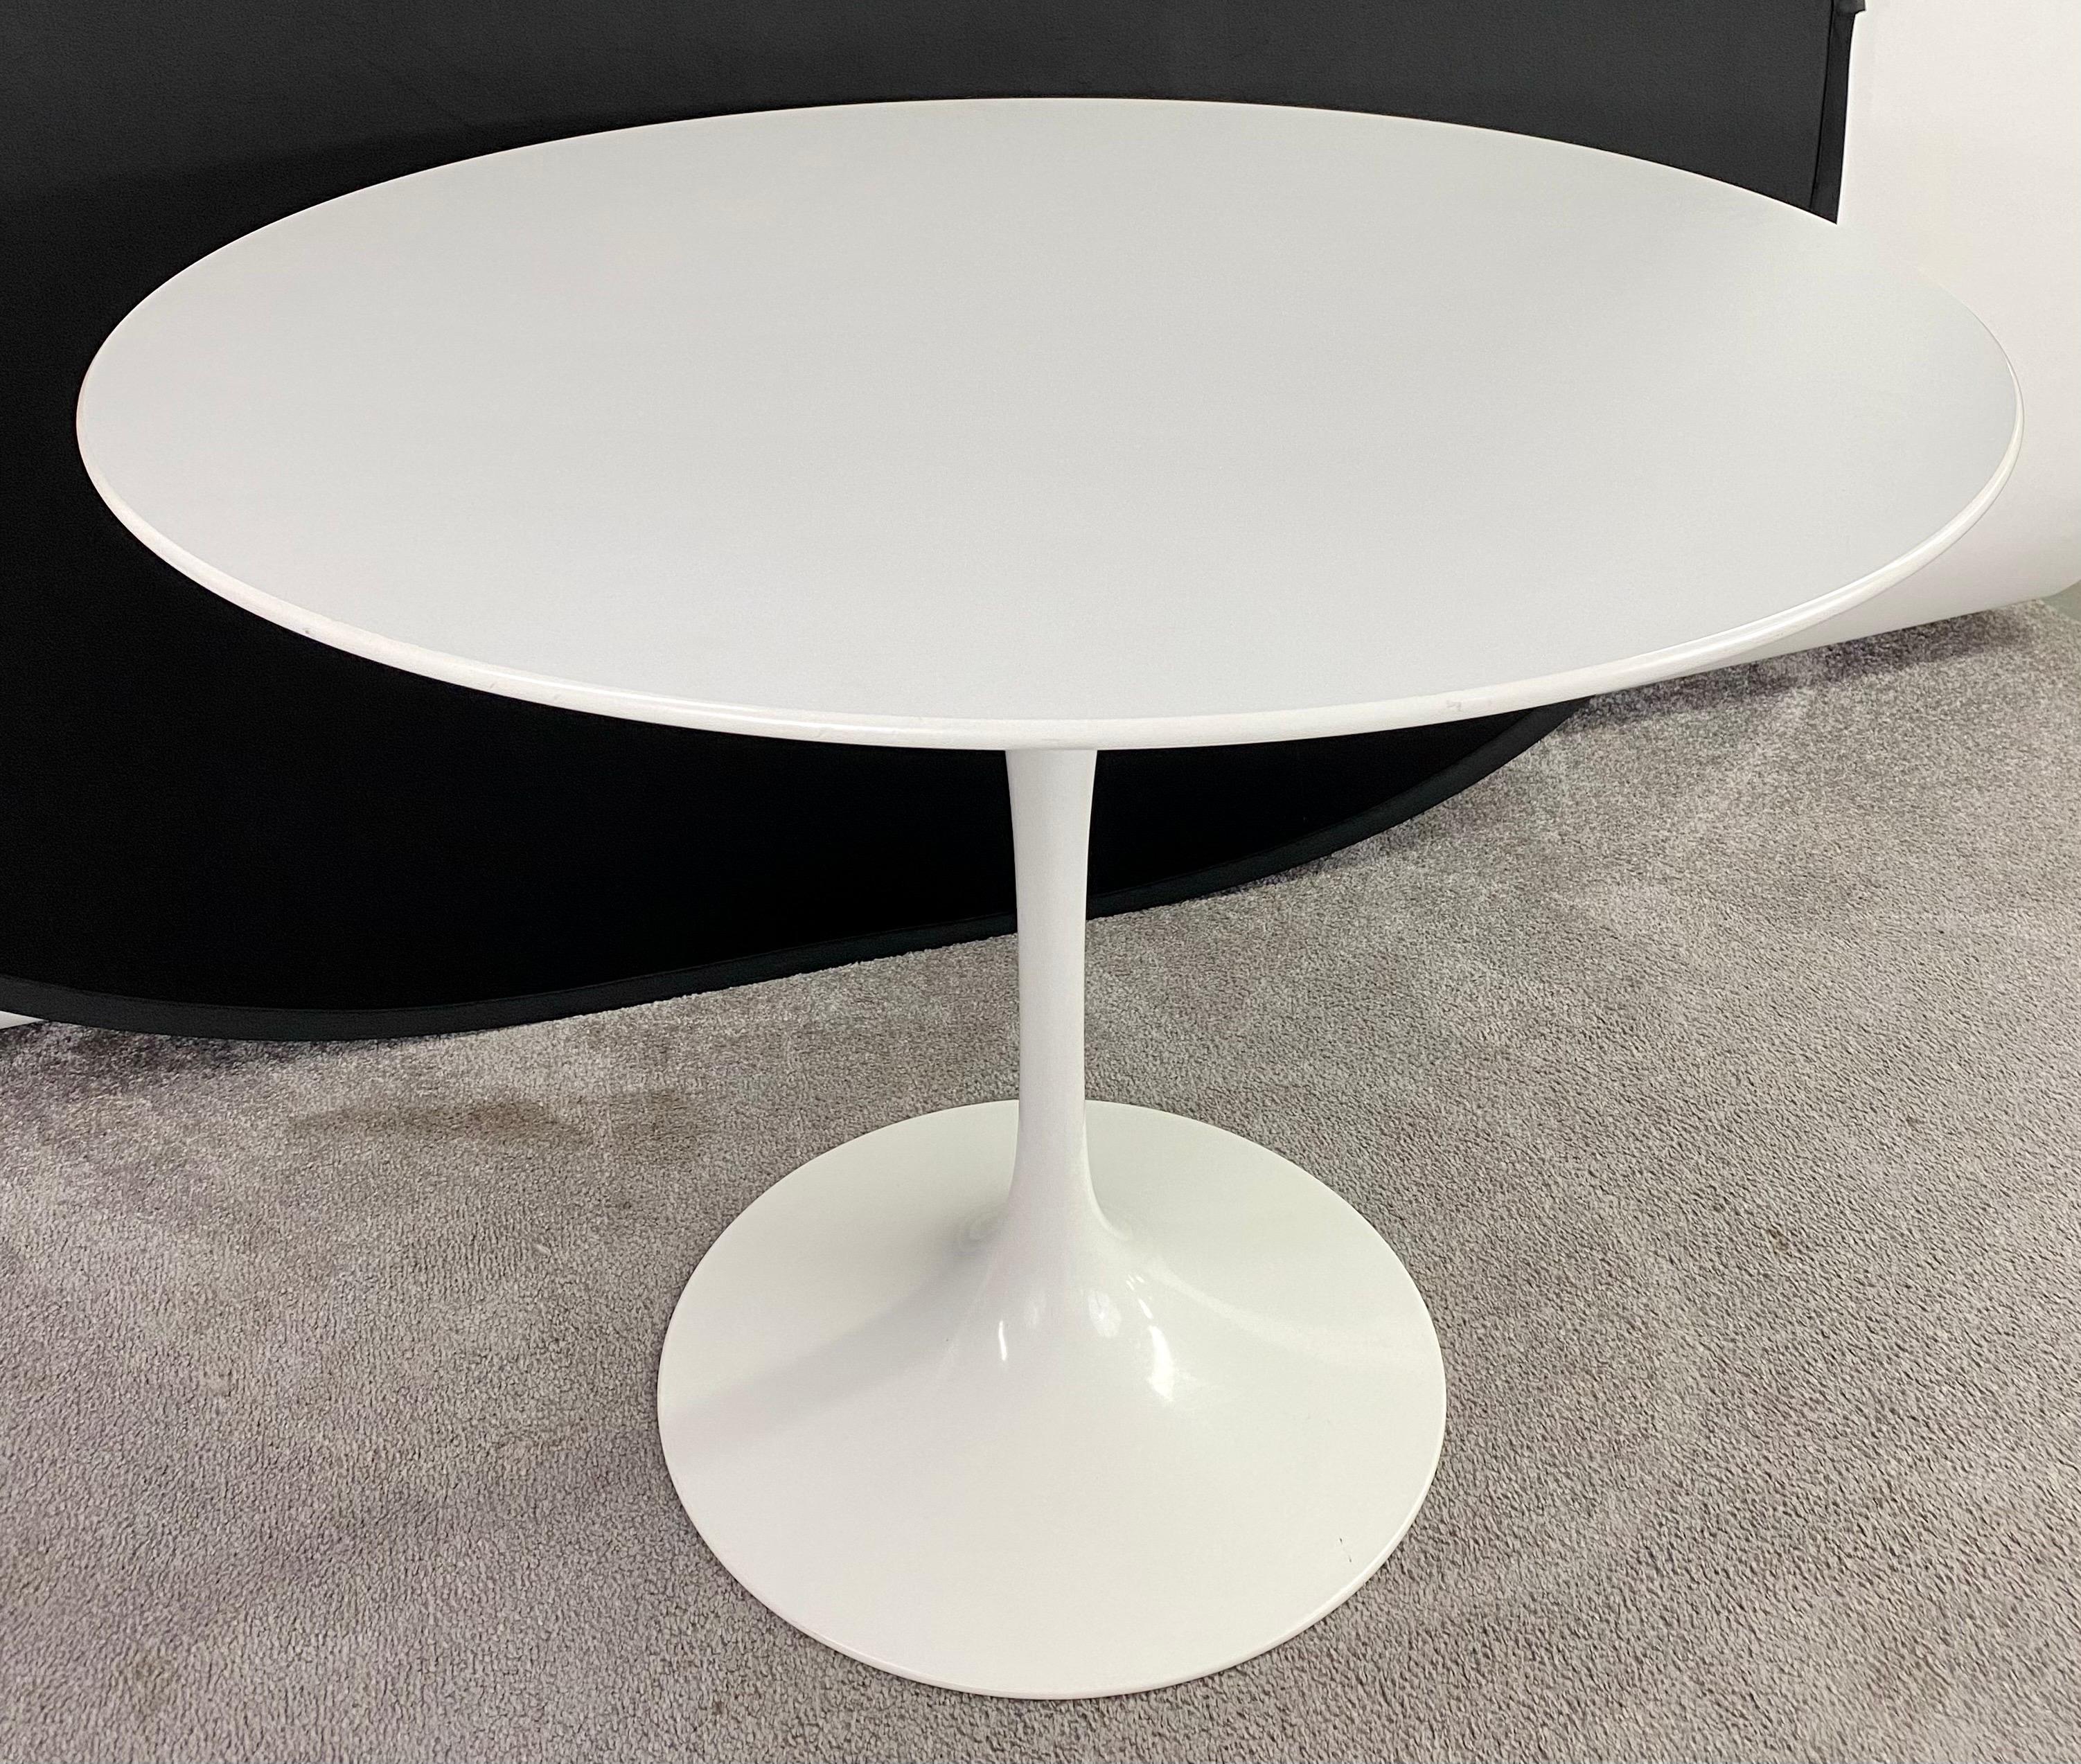 The Eero Saarinen (American / Finish 1910 - 1961) Mid-Century Modern white tulip pedestal dining or center table is one of the most iconic MCM design pieces. The table was designed for and manufactured by the quality house Knoll Studios. Elegant and